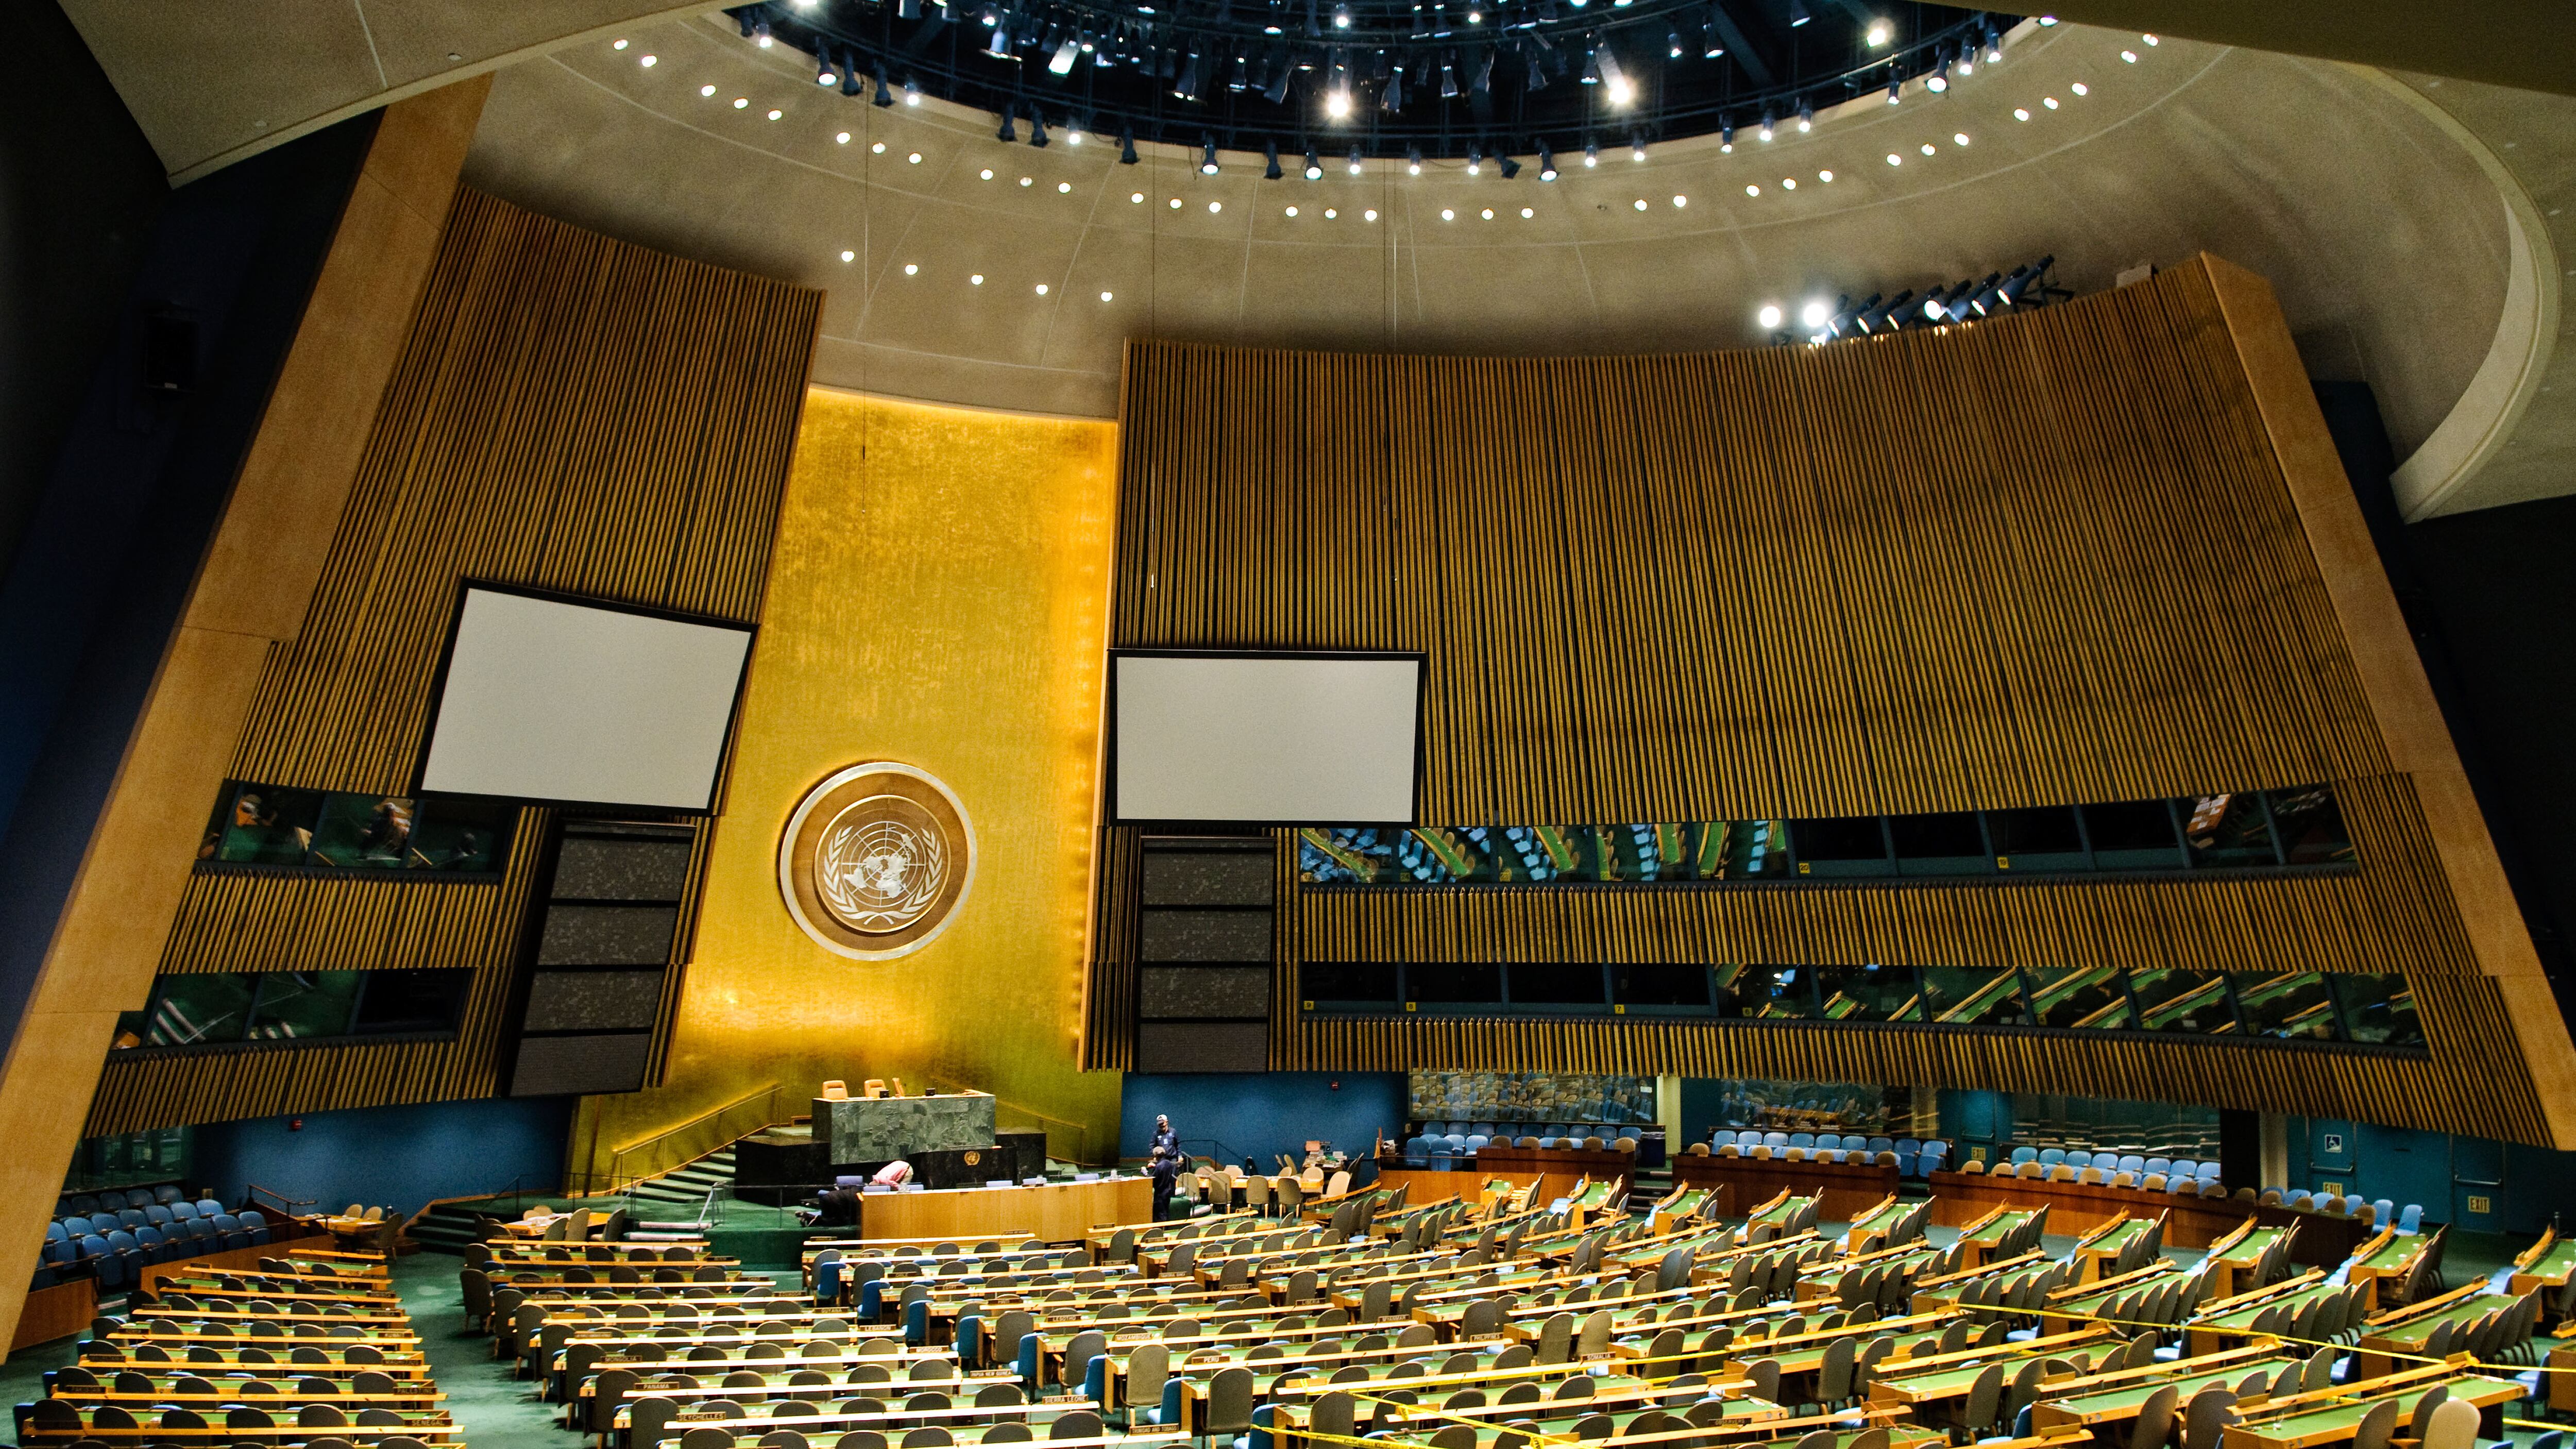 Interior of the chamber of the UN General Assembly at United Nations headquarters in New York